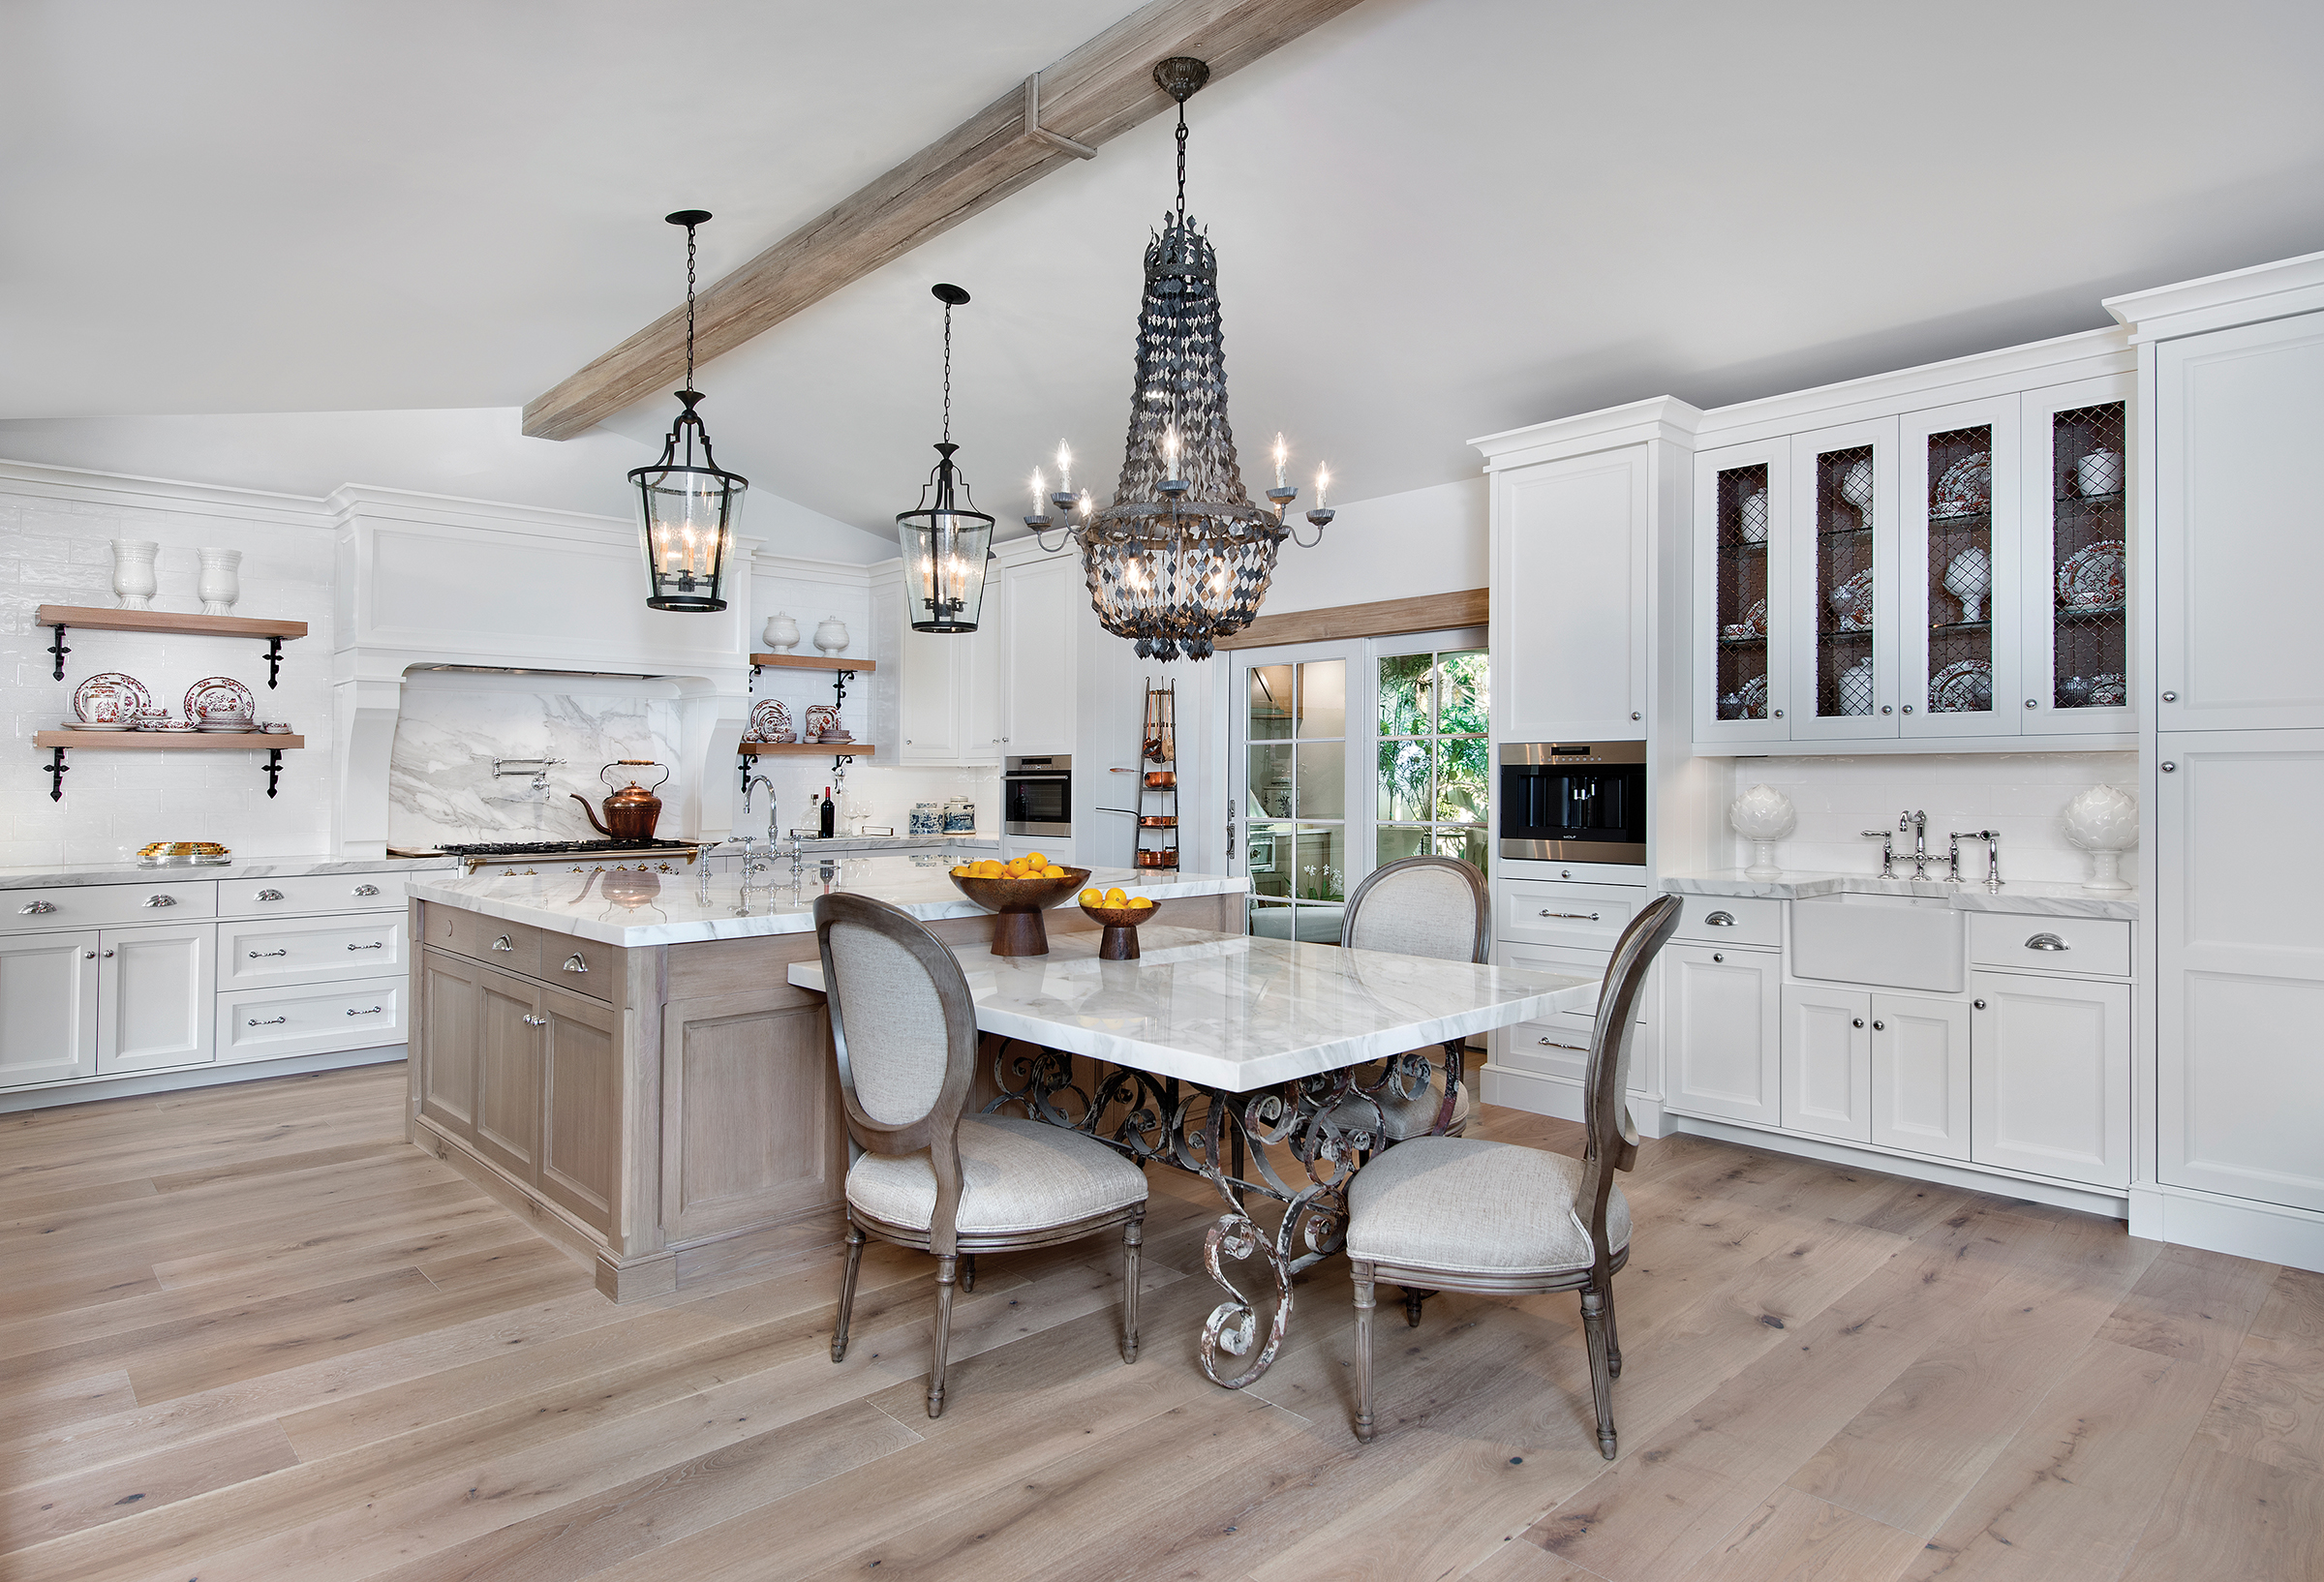  The French country kitchen is consistently one of the favorite rooms in the home. Designed by Carol Ruffino and manufactured by Ruffino Cabinetry, the Alabaster White-finished cabinets provide the perfect canvas on which to build. Wire-grill door in